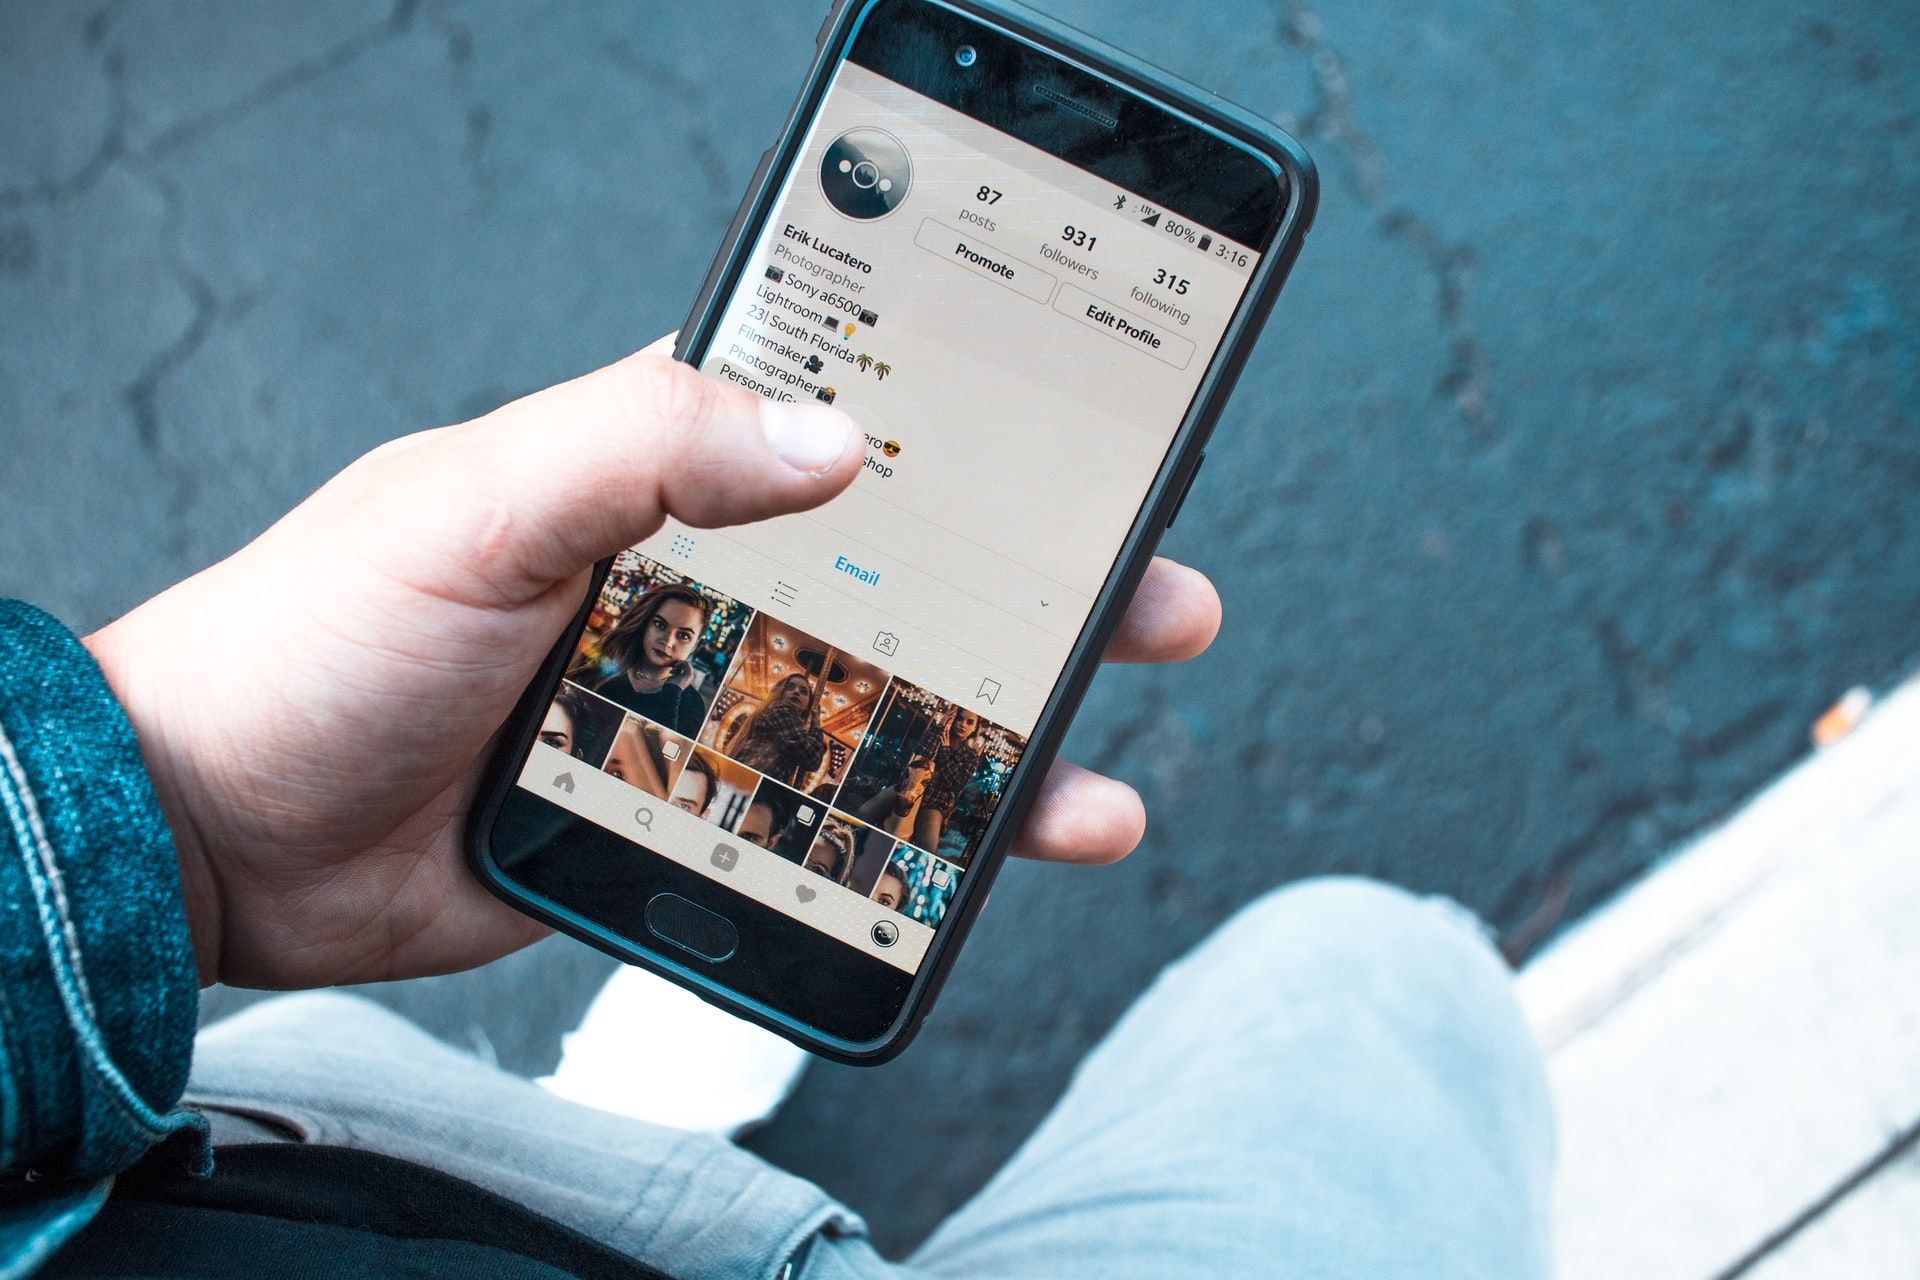 How To Change Your Email Address On Instagram Step by Step